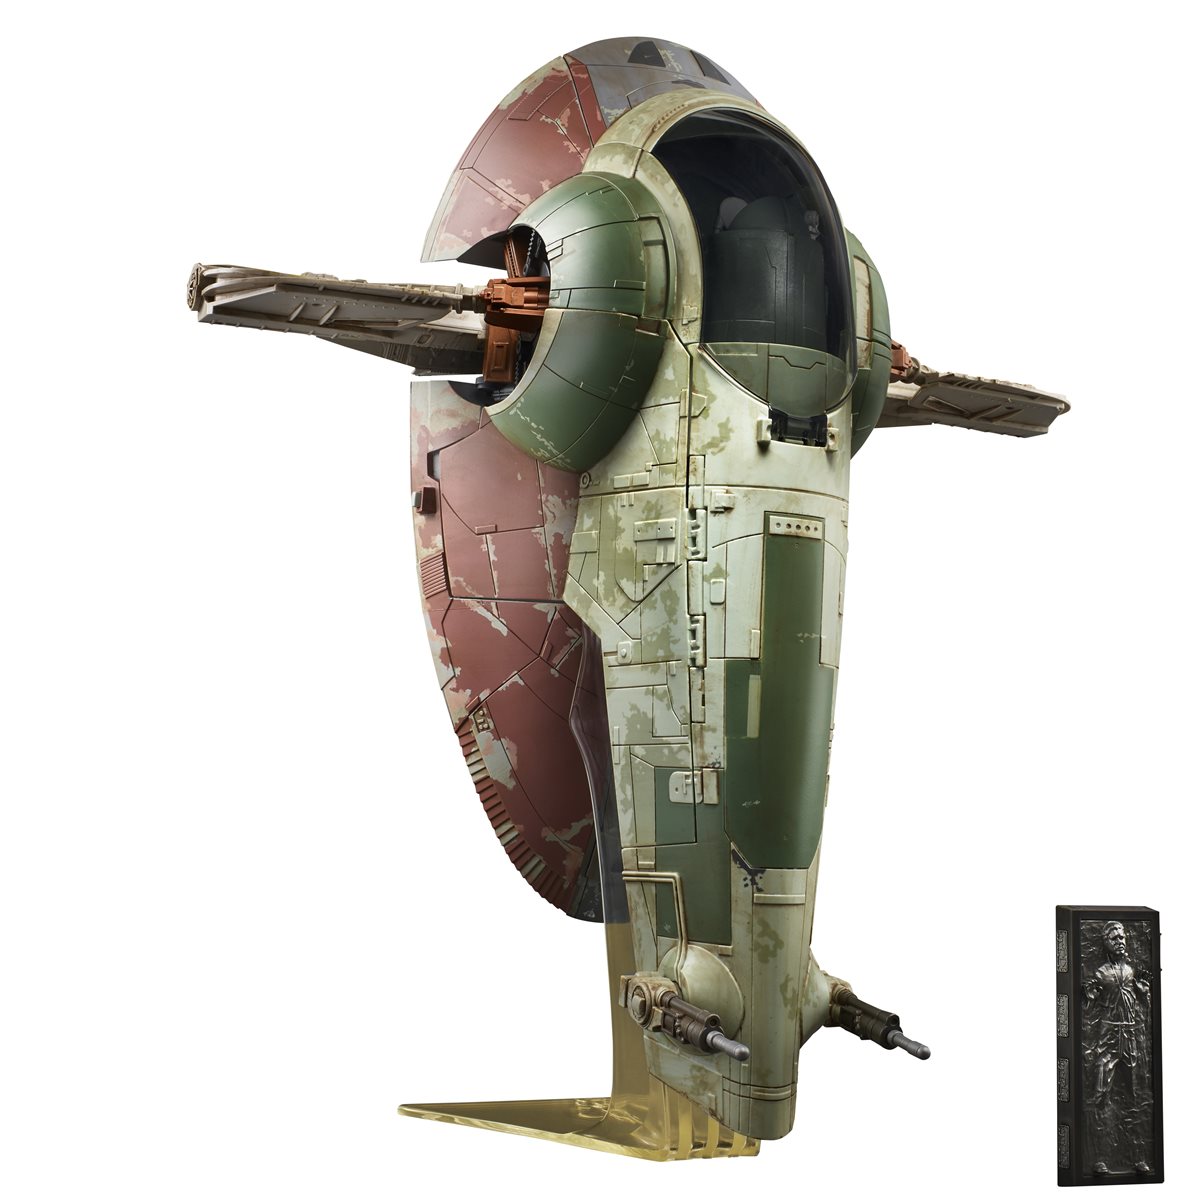 Star Wars Vintage Collection SLAVE 1 Ship 3.75 Excl.**IN STOCK *Free Yoda Figure